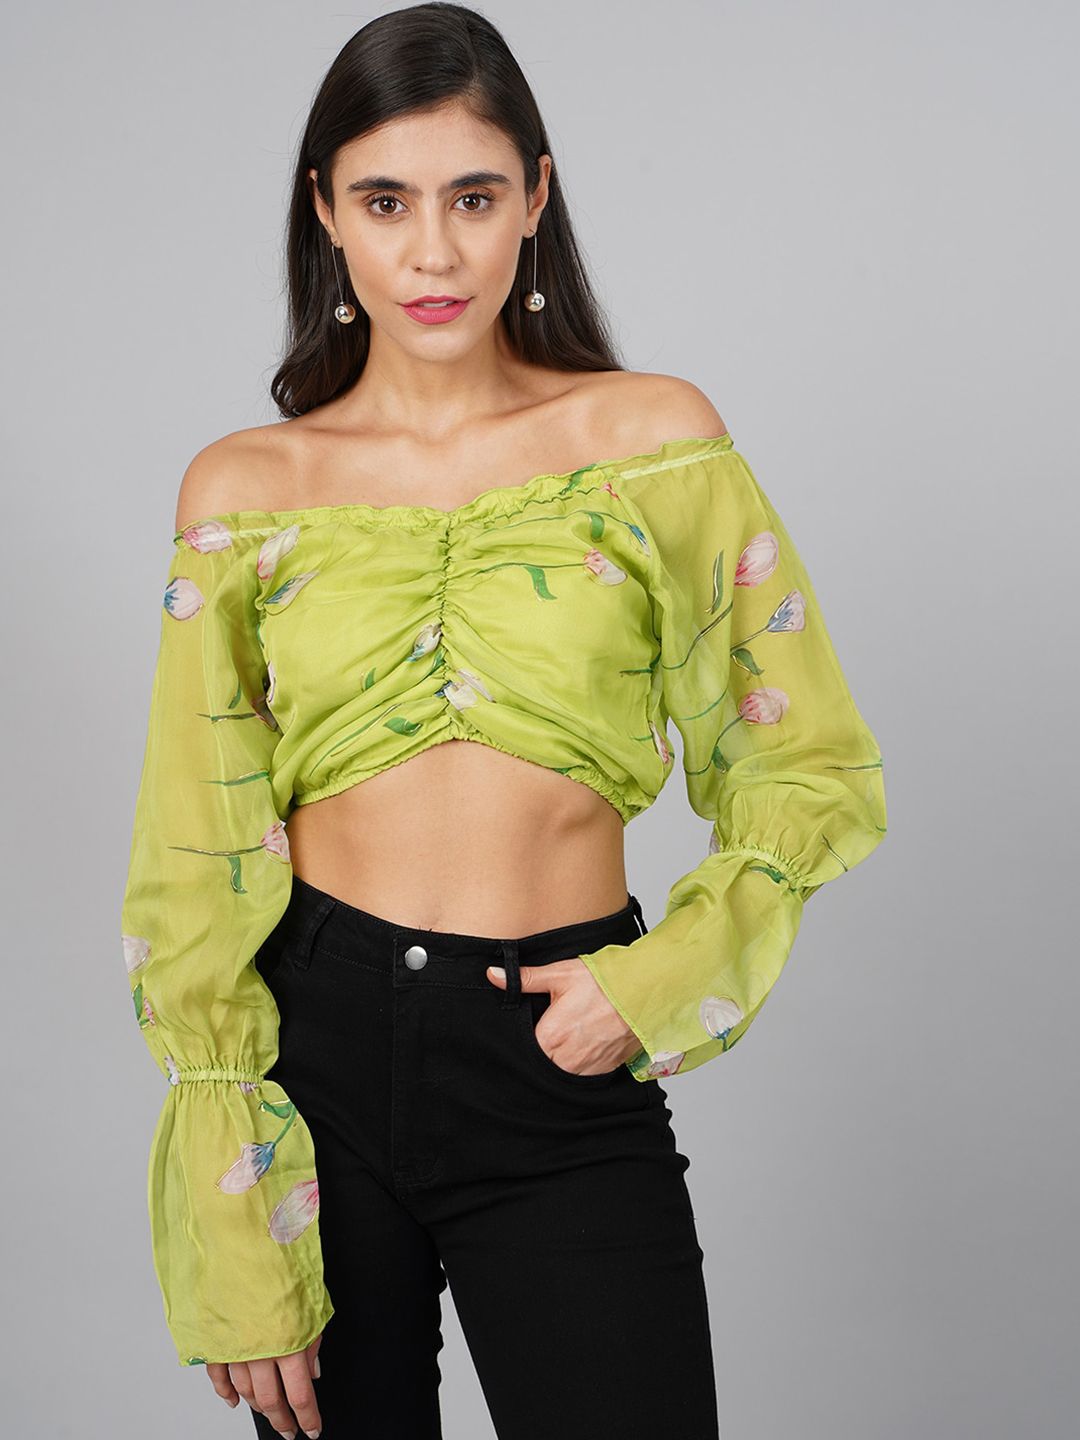 Cation Print Off-Shoulder Bardot Crop Top Price in India